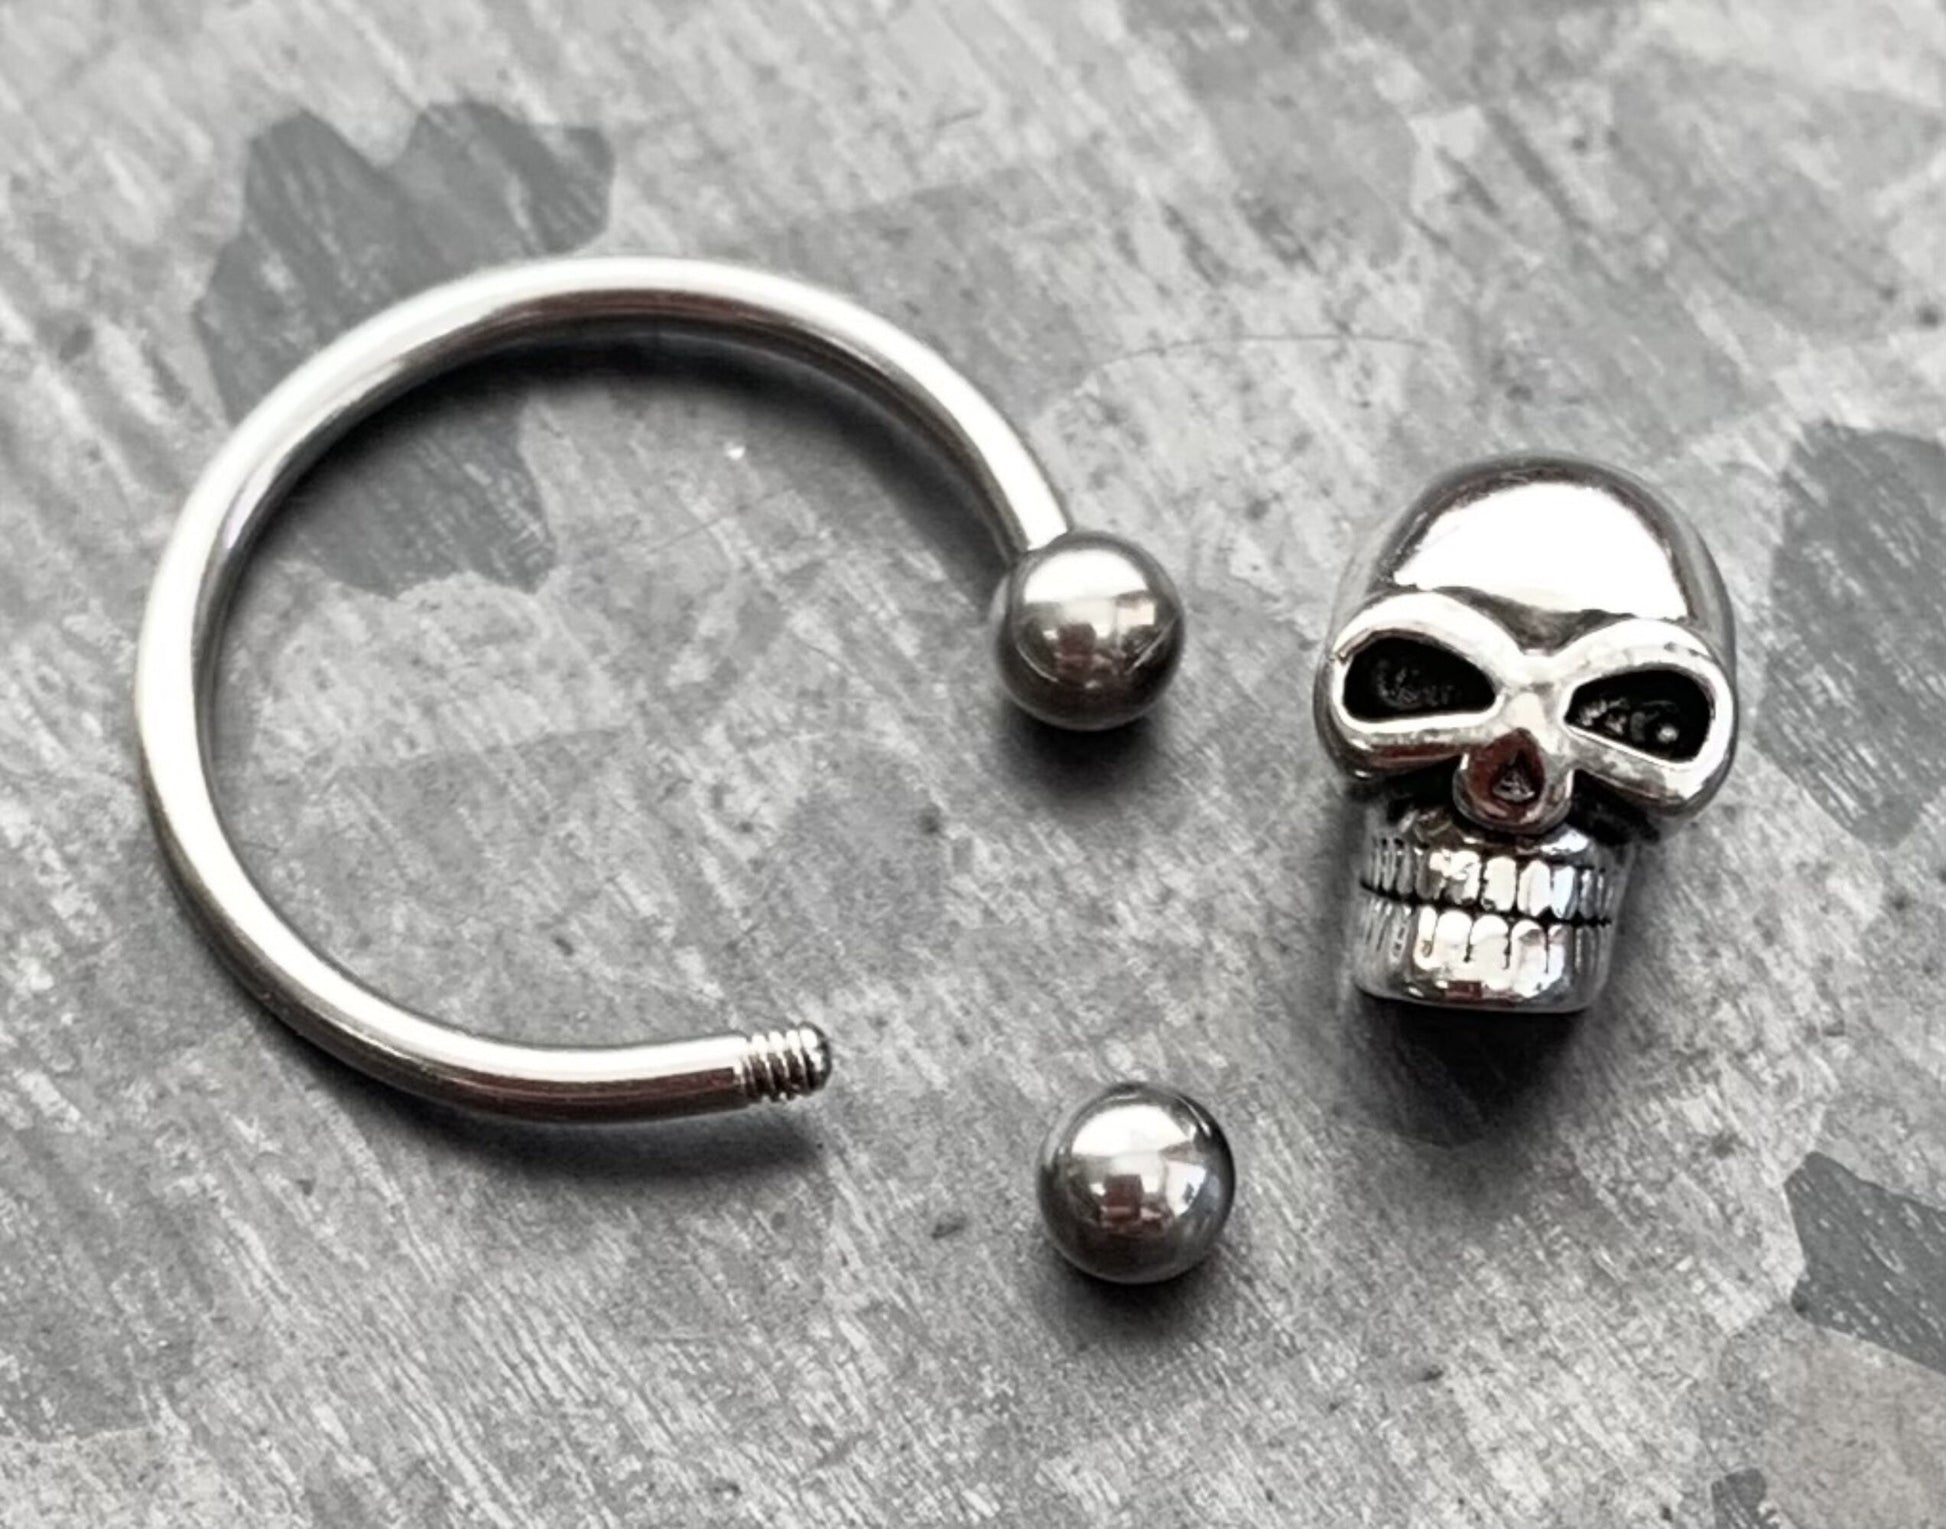 1 Piece Unique Skull 316L Surgical Steel Captive Bead Ring / Circular Barbell - Gauges 14g or 16g with a 1/2" internal diameter!